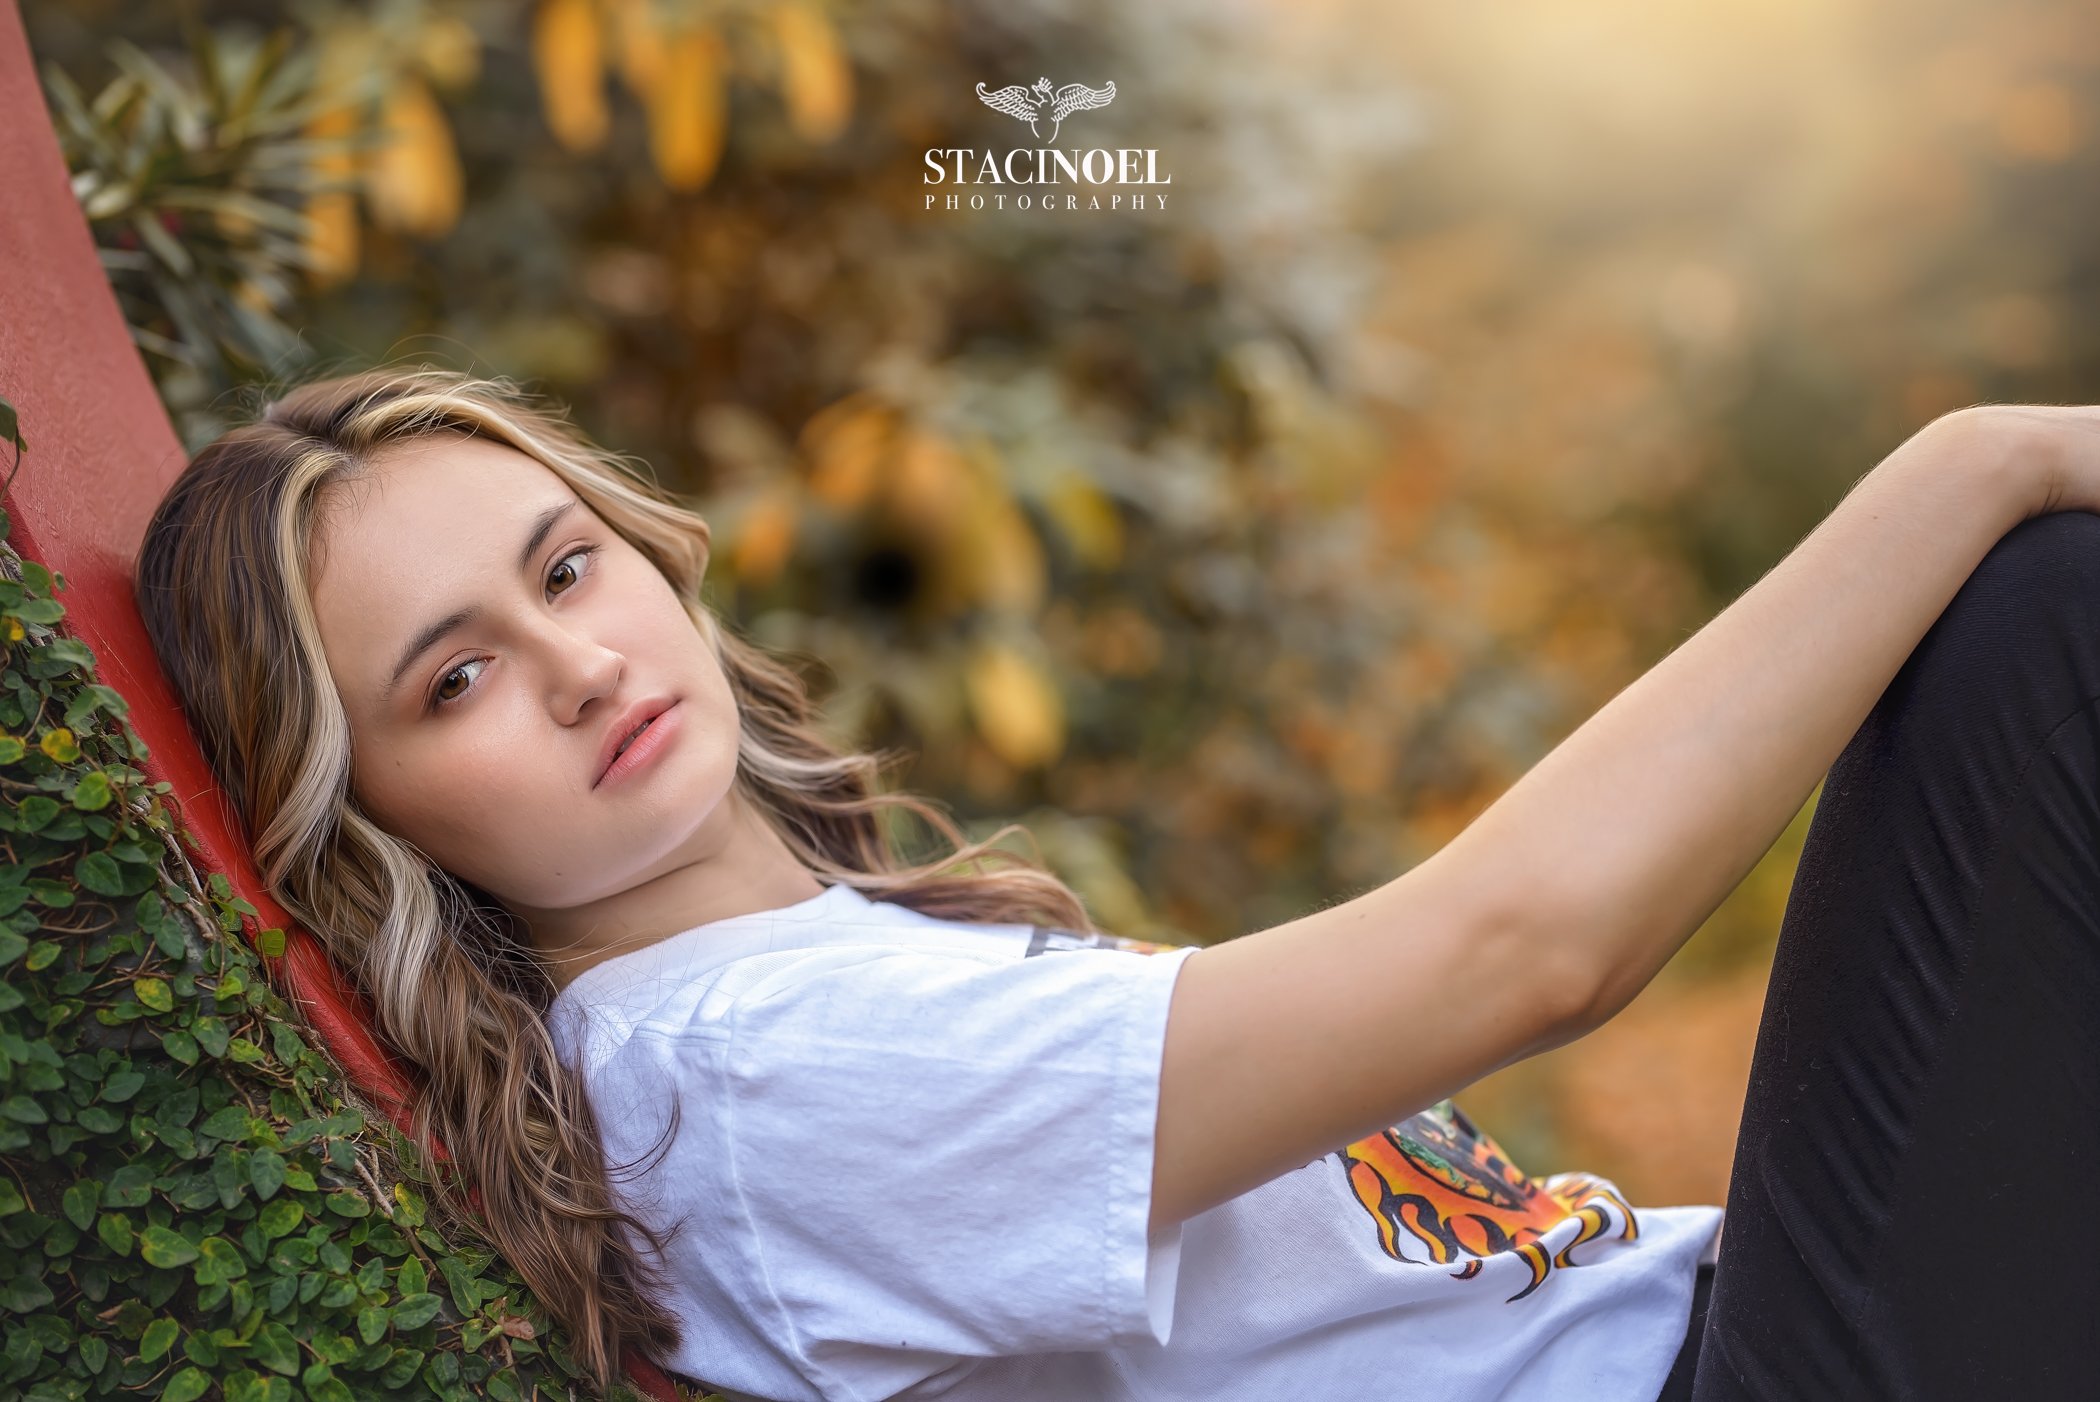  Charlotte senior photographer Staci Noel photography captures a fall senior session at UNCC botanical gardens with autumn colors and high school senior girl in beautiful outdoor setting 